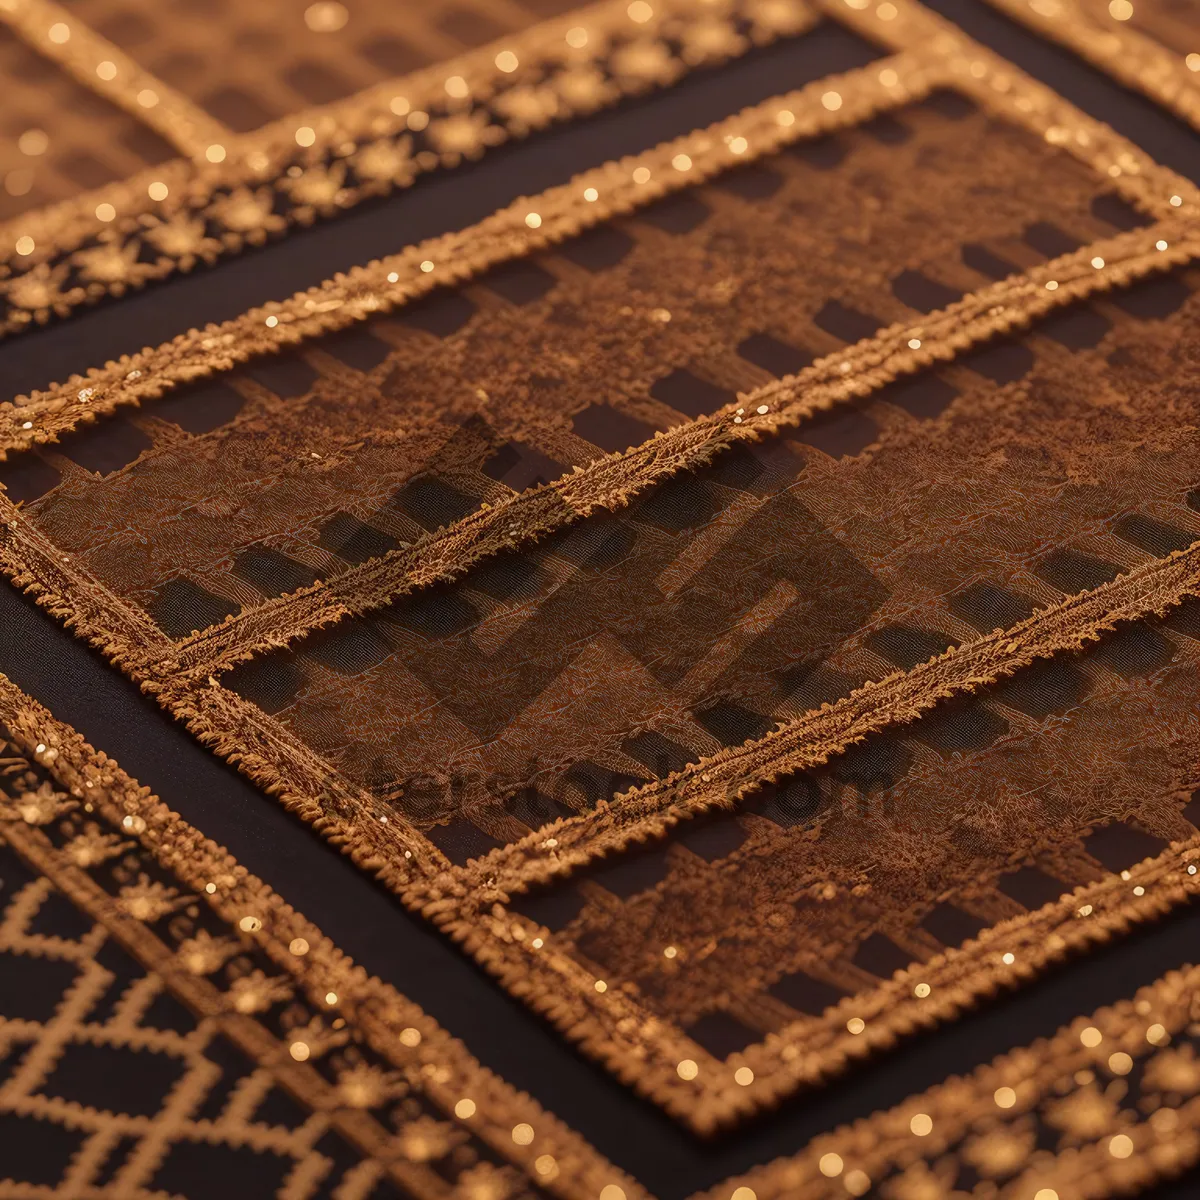 Picture of Prayer Rug - Exquisite Design with Intricate Patterns